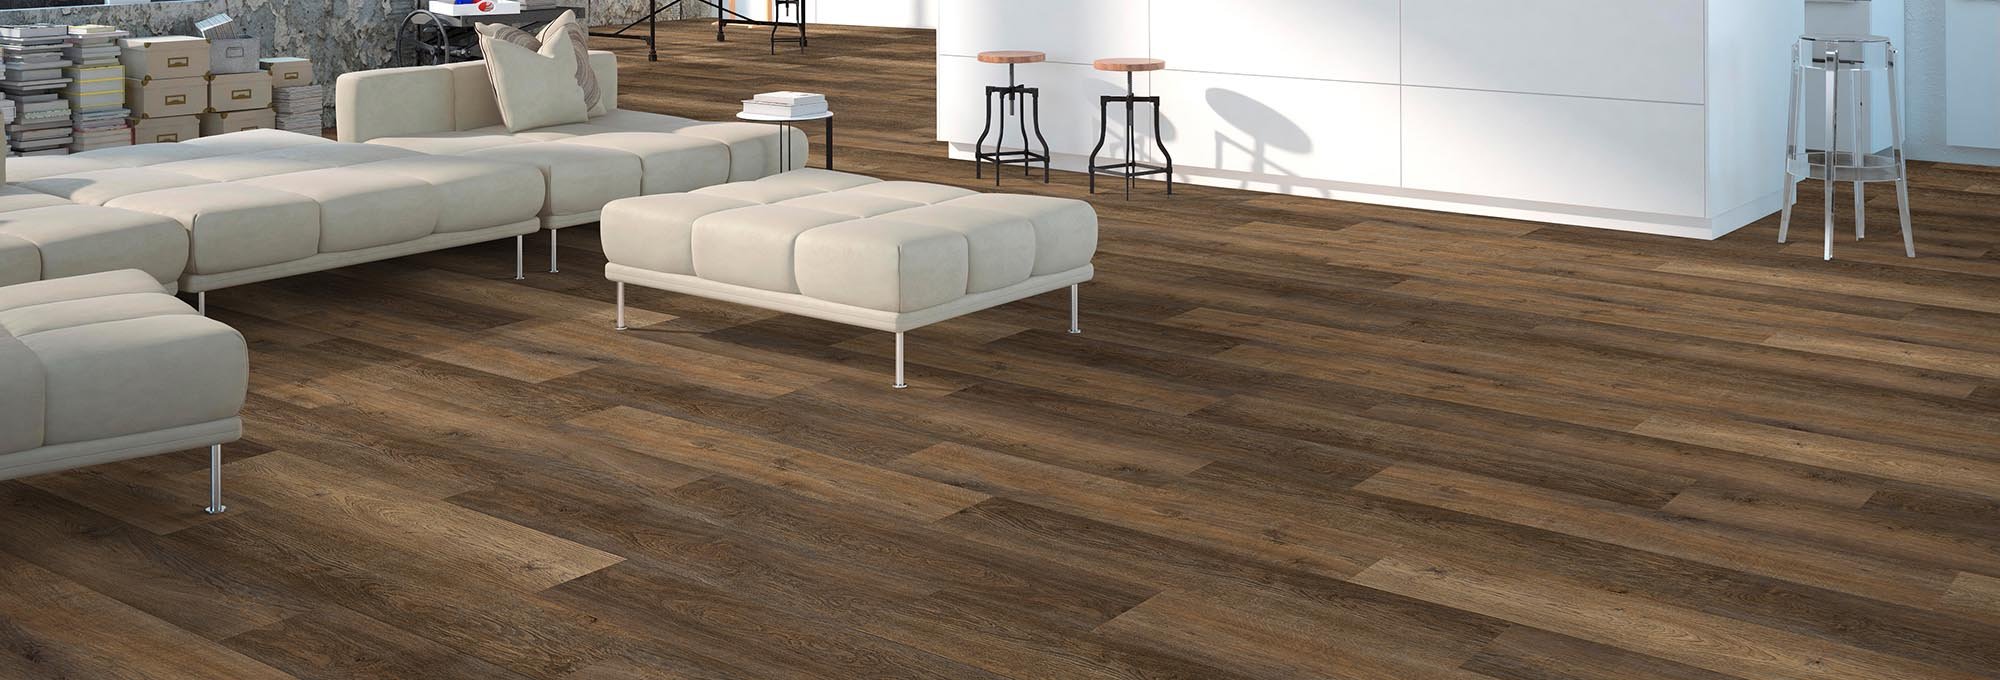 Shop Flooring Products from CM Floor Covering Inc in Stockton, CA